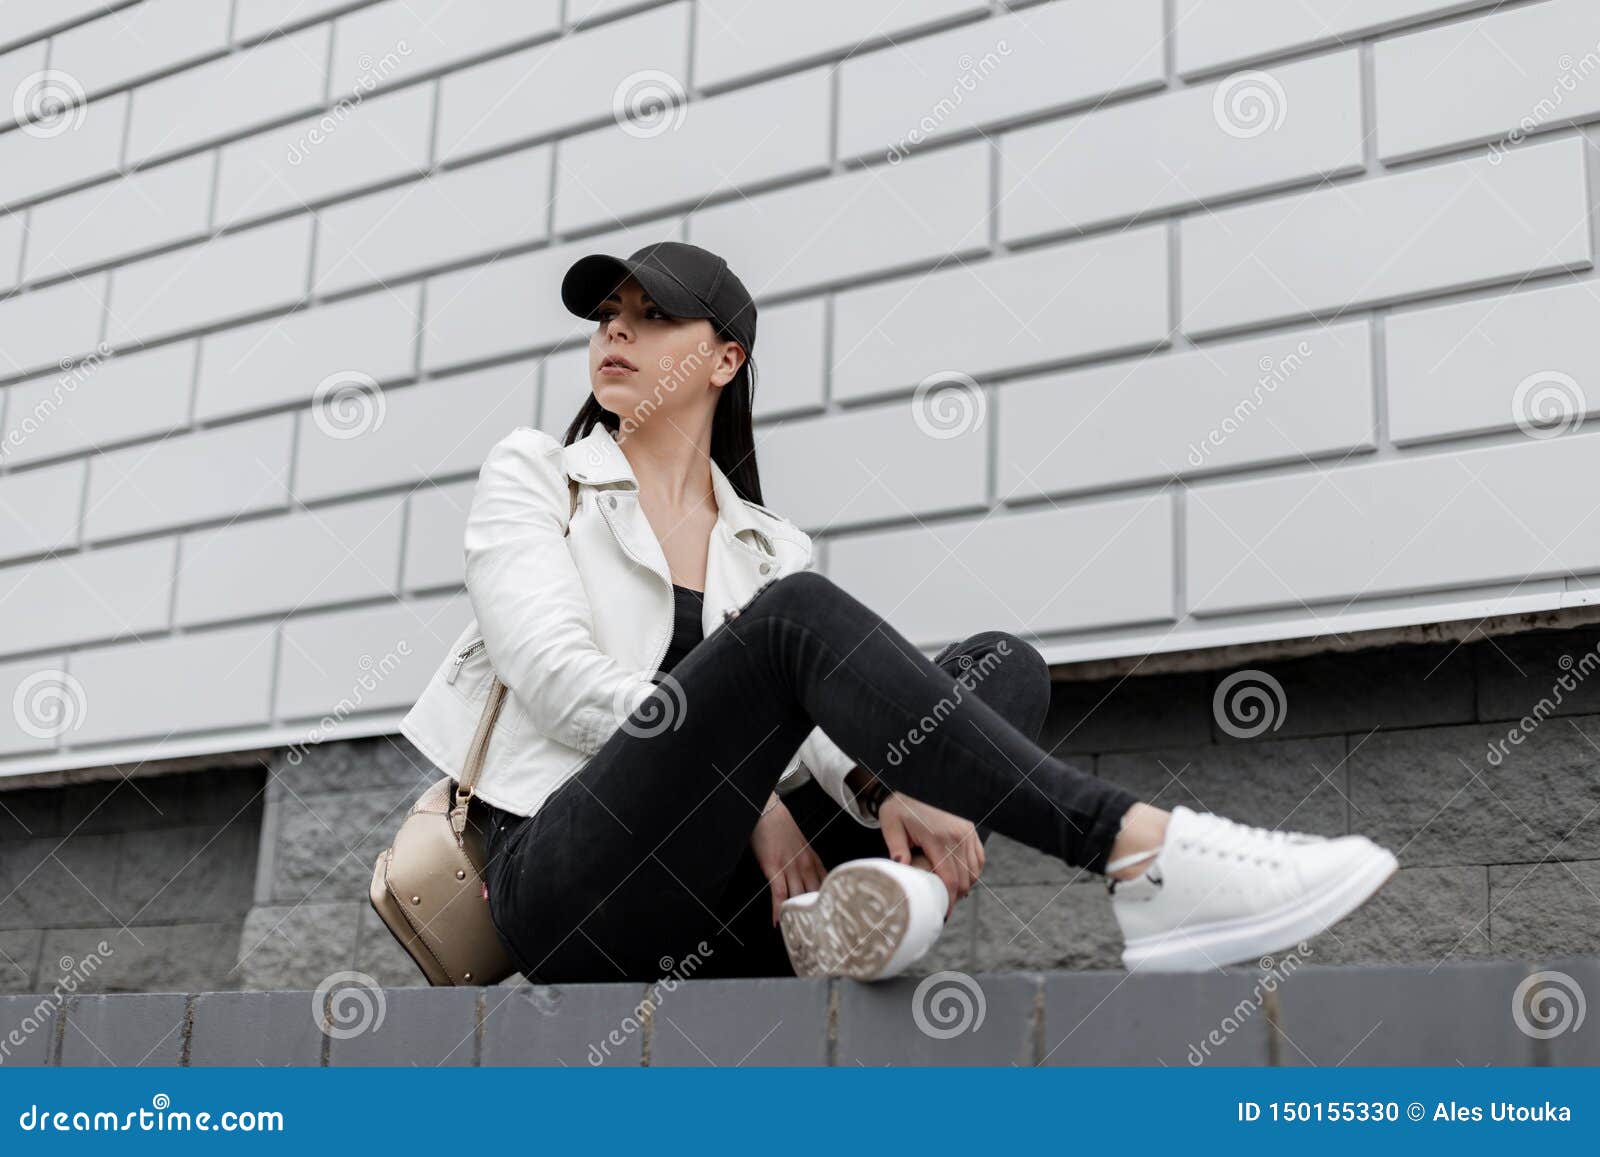 Premium Photo | Elegant beautiful young woman model in fashion casual  clothes with a white shirt and black jeans stands near a vintage building  in the city pretty girl